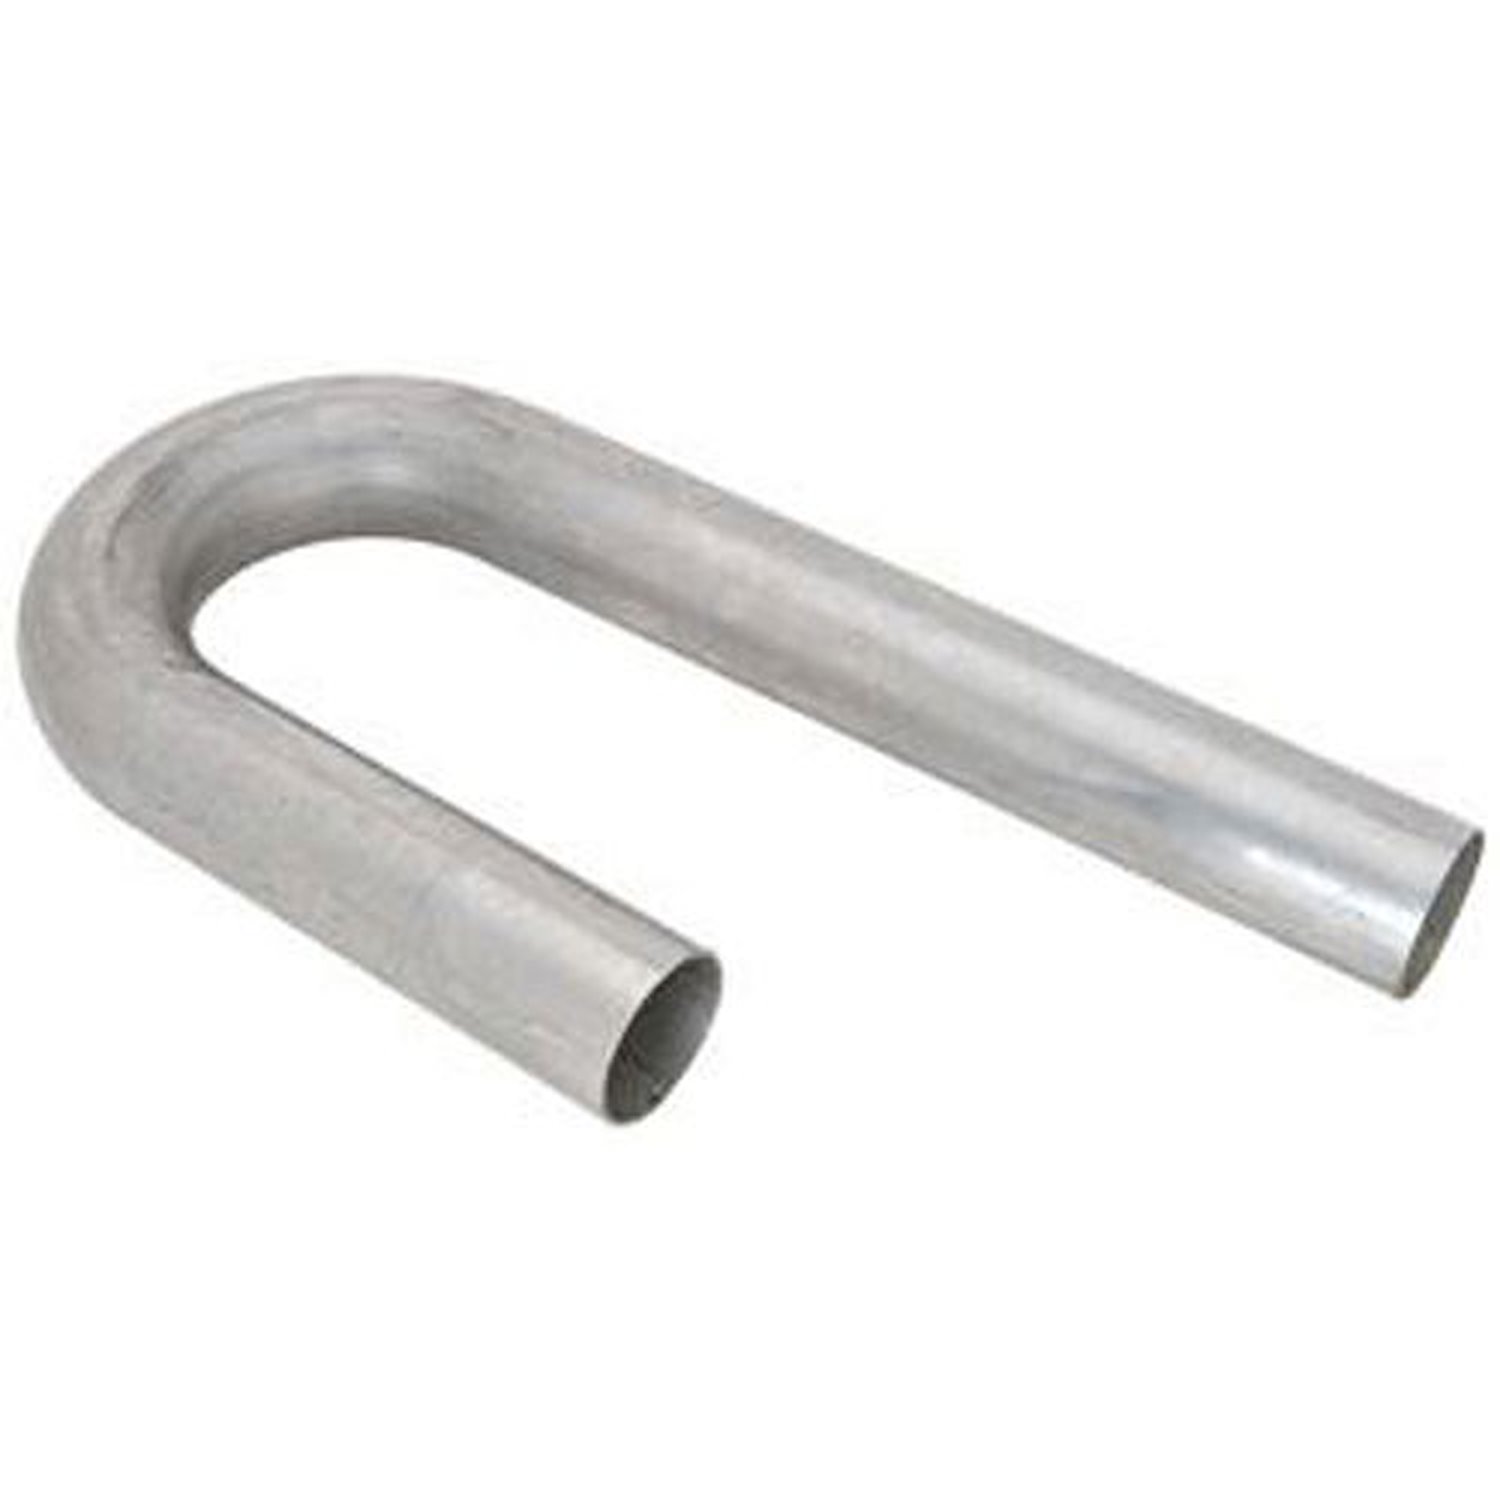 Stainless Steel 1-3/4" J-Bend